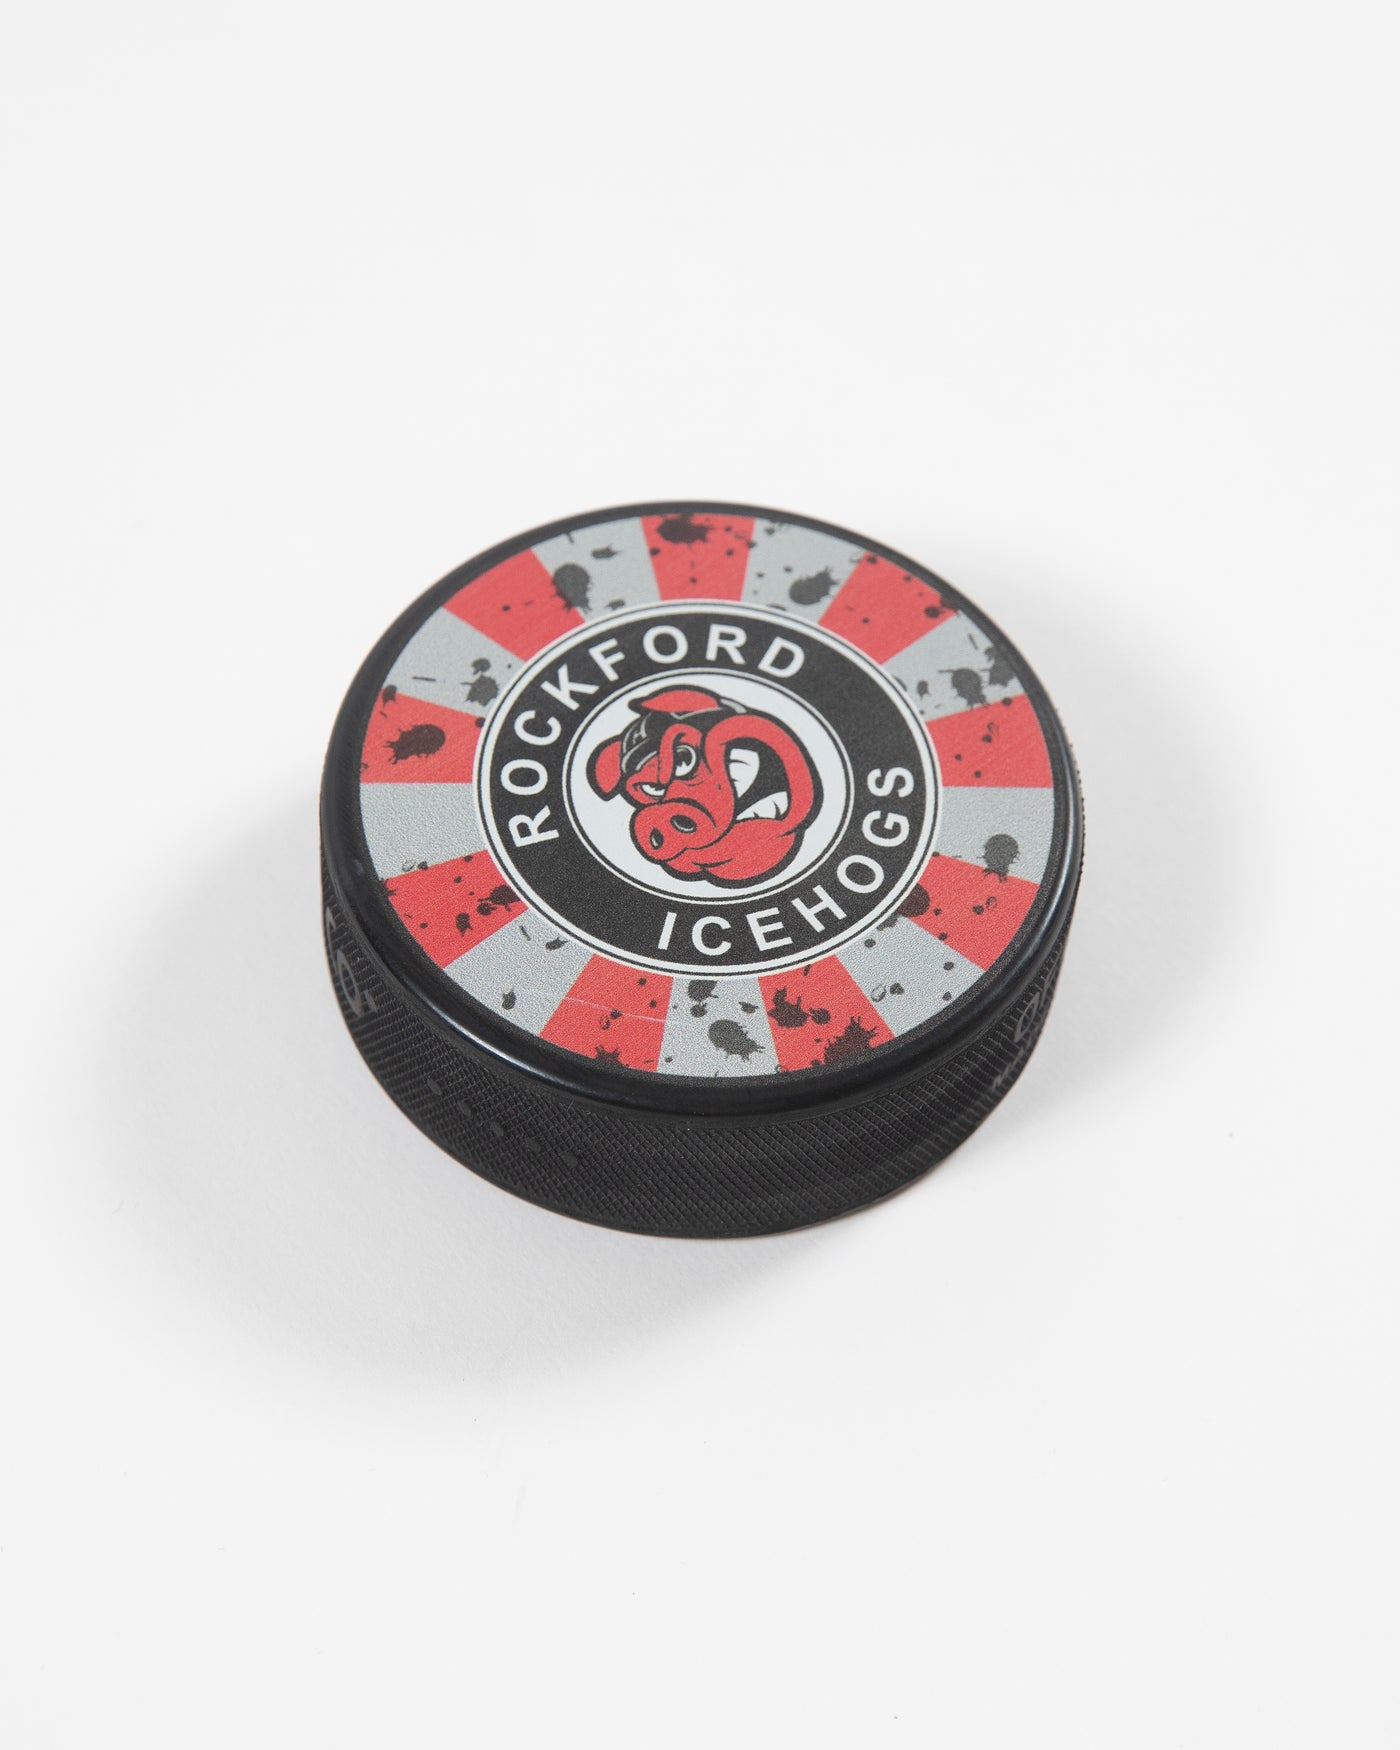 Red and grey distressed Rockford IceHogs hockey puck - angled lay flat